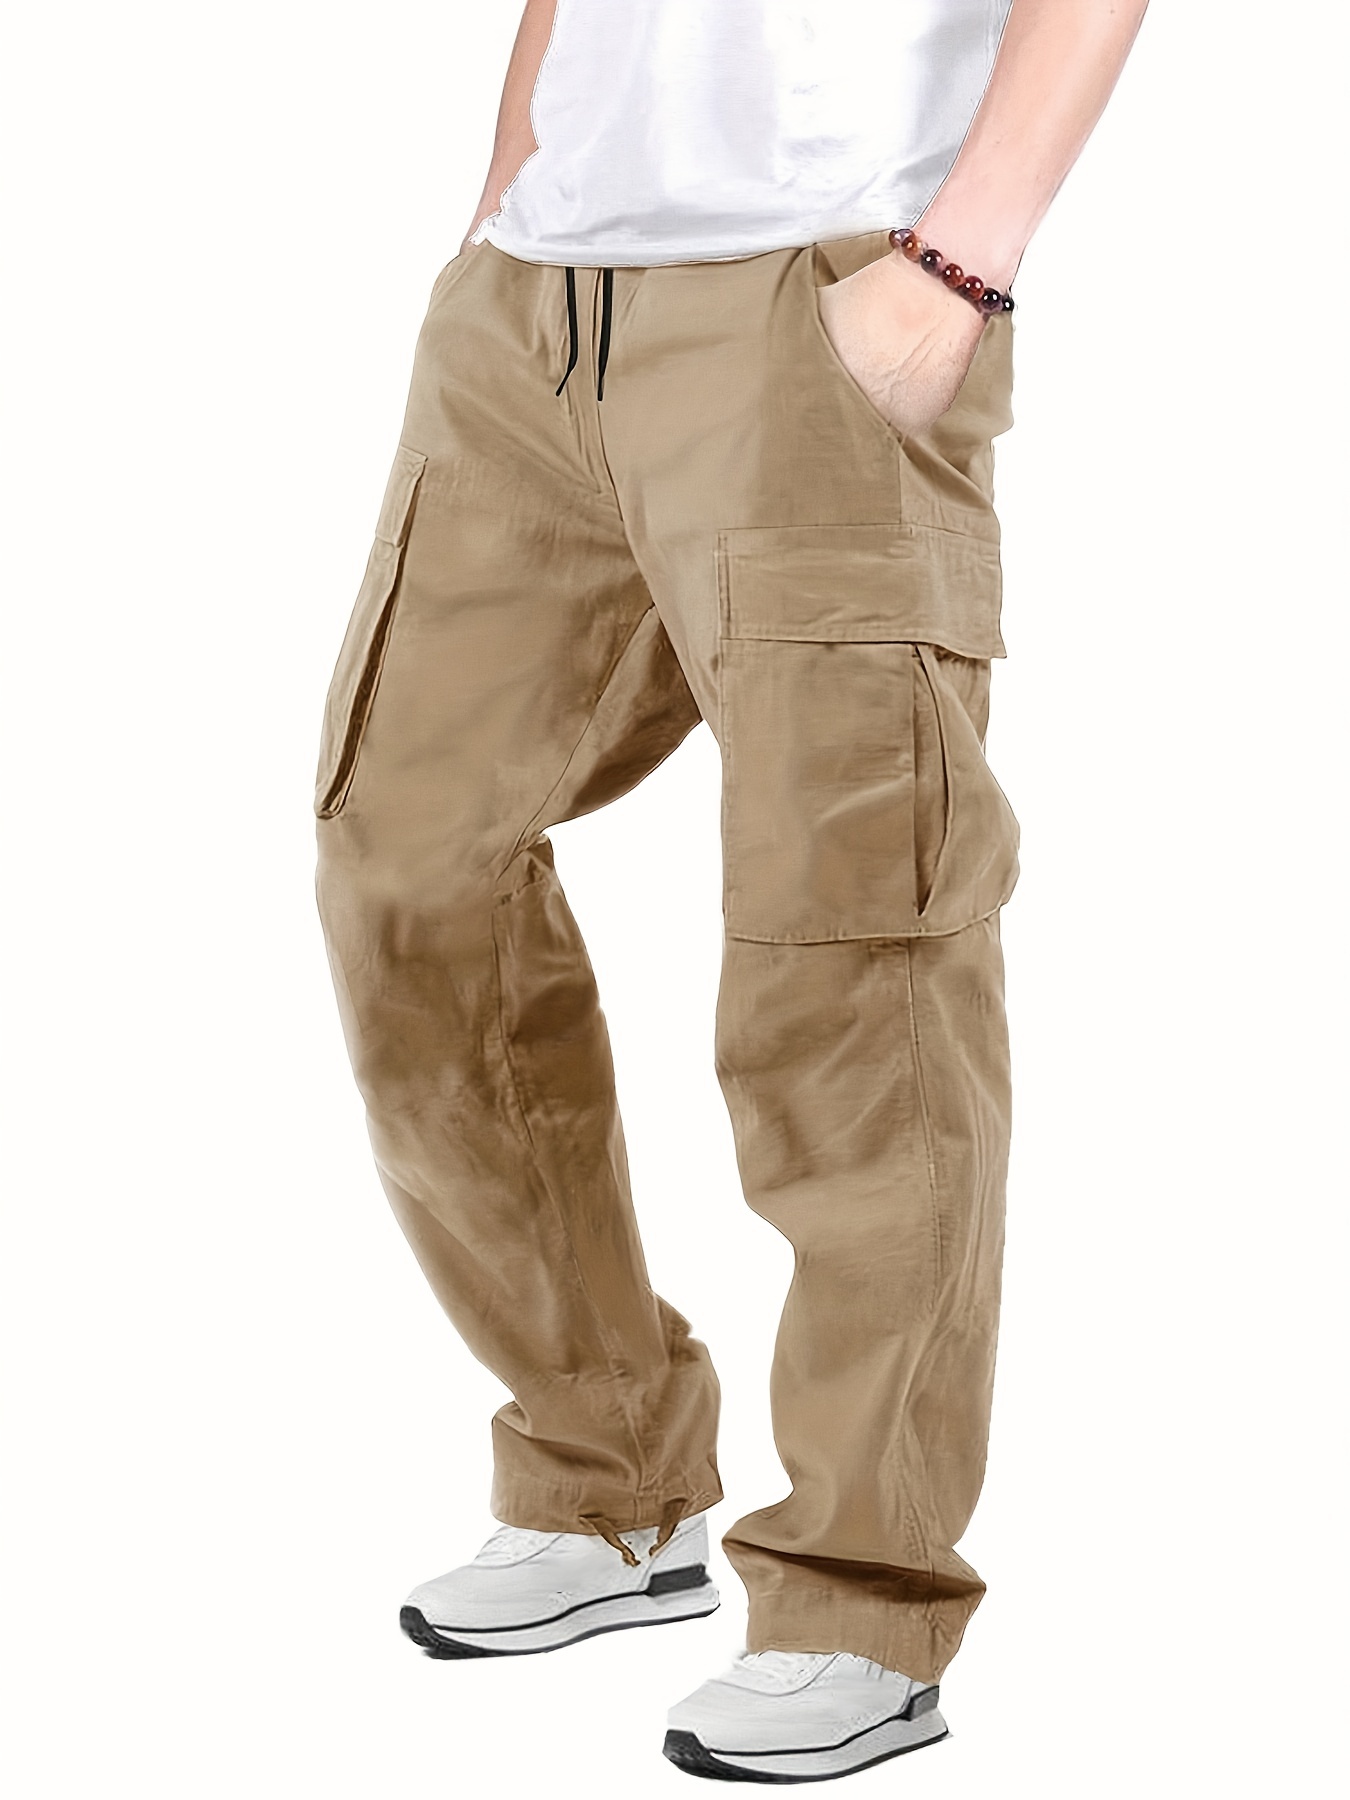 Mens Baggy Cargo Pants Casual Lightweight Hiking Fishing Trousers  Drawstring Outdoor Relaxed Fit Slacks Cargo Pants